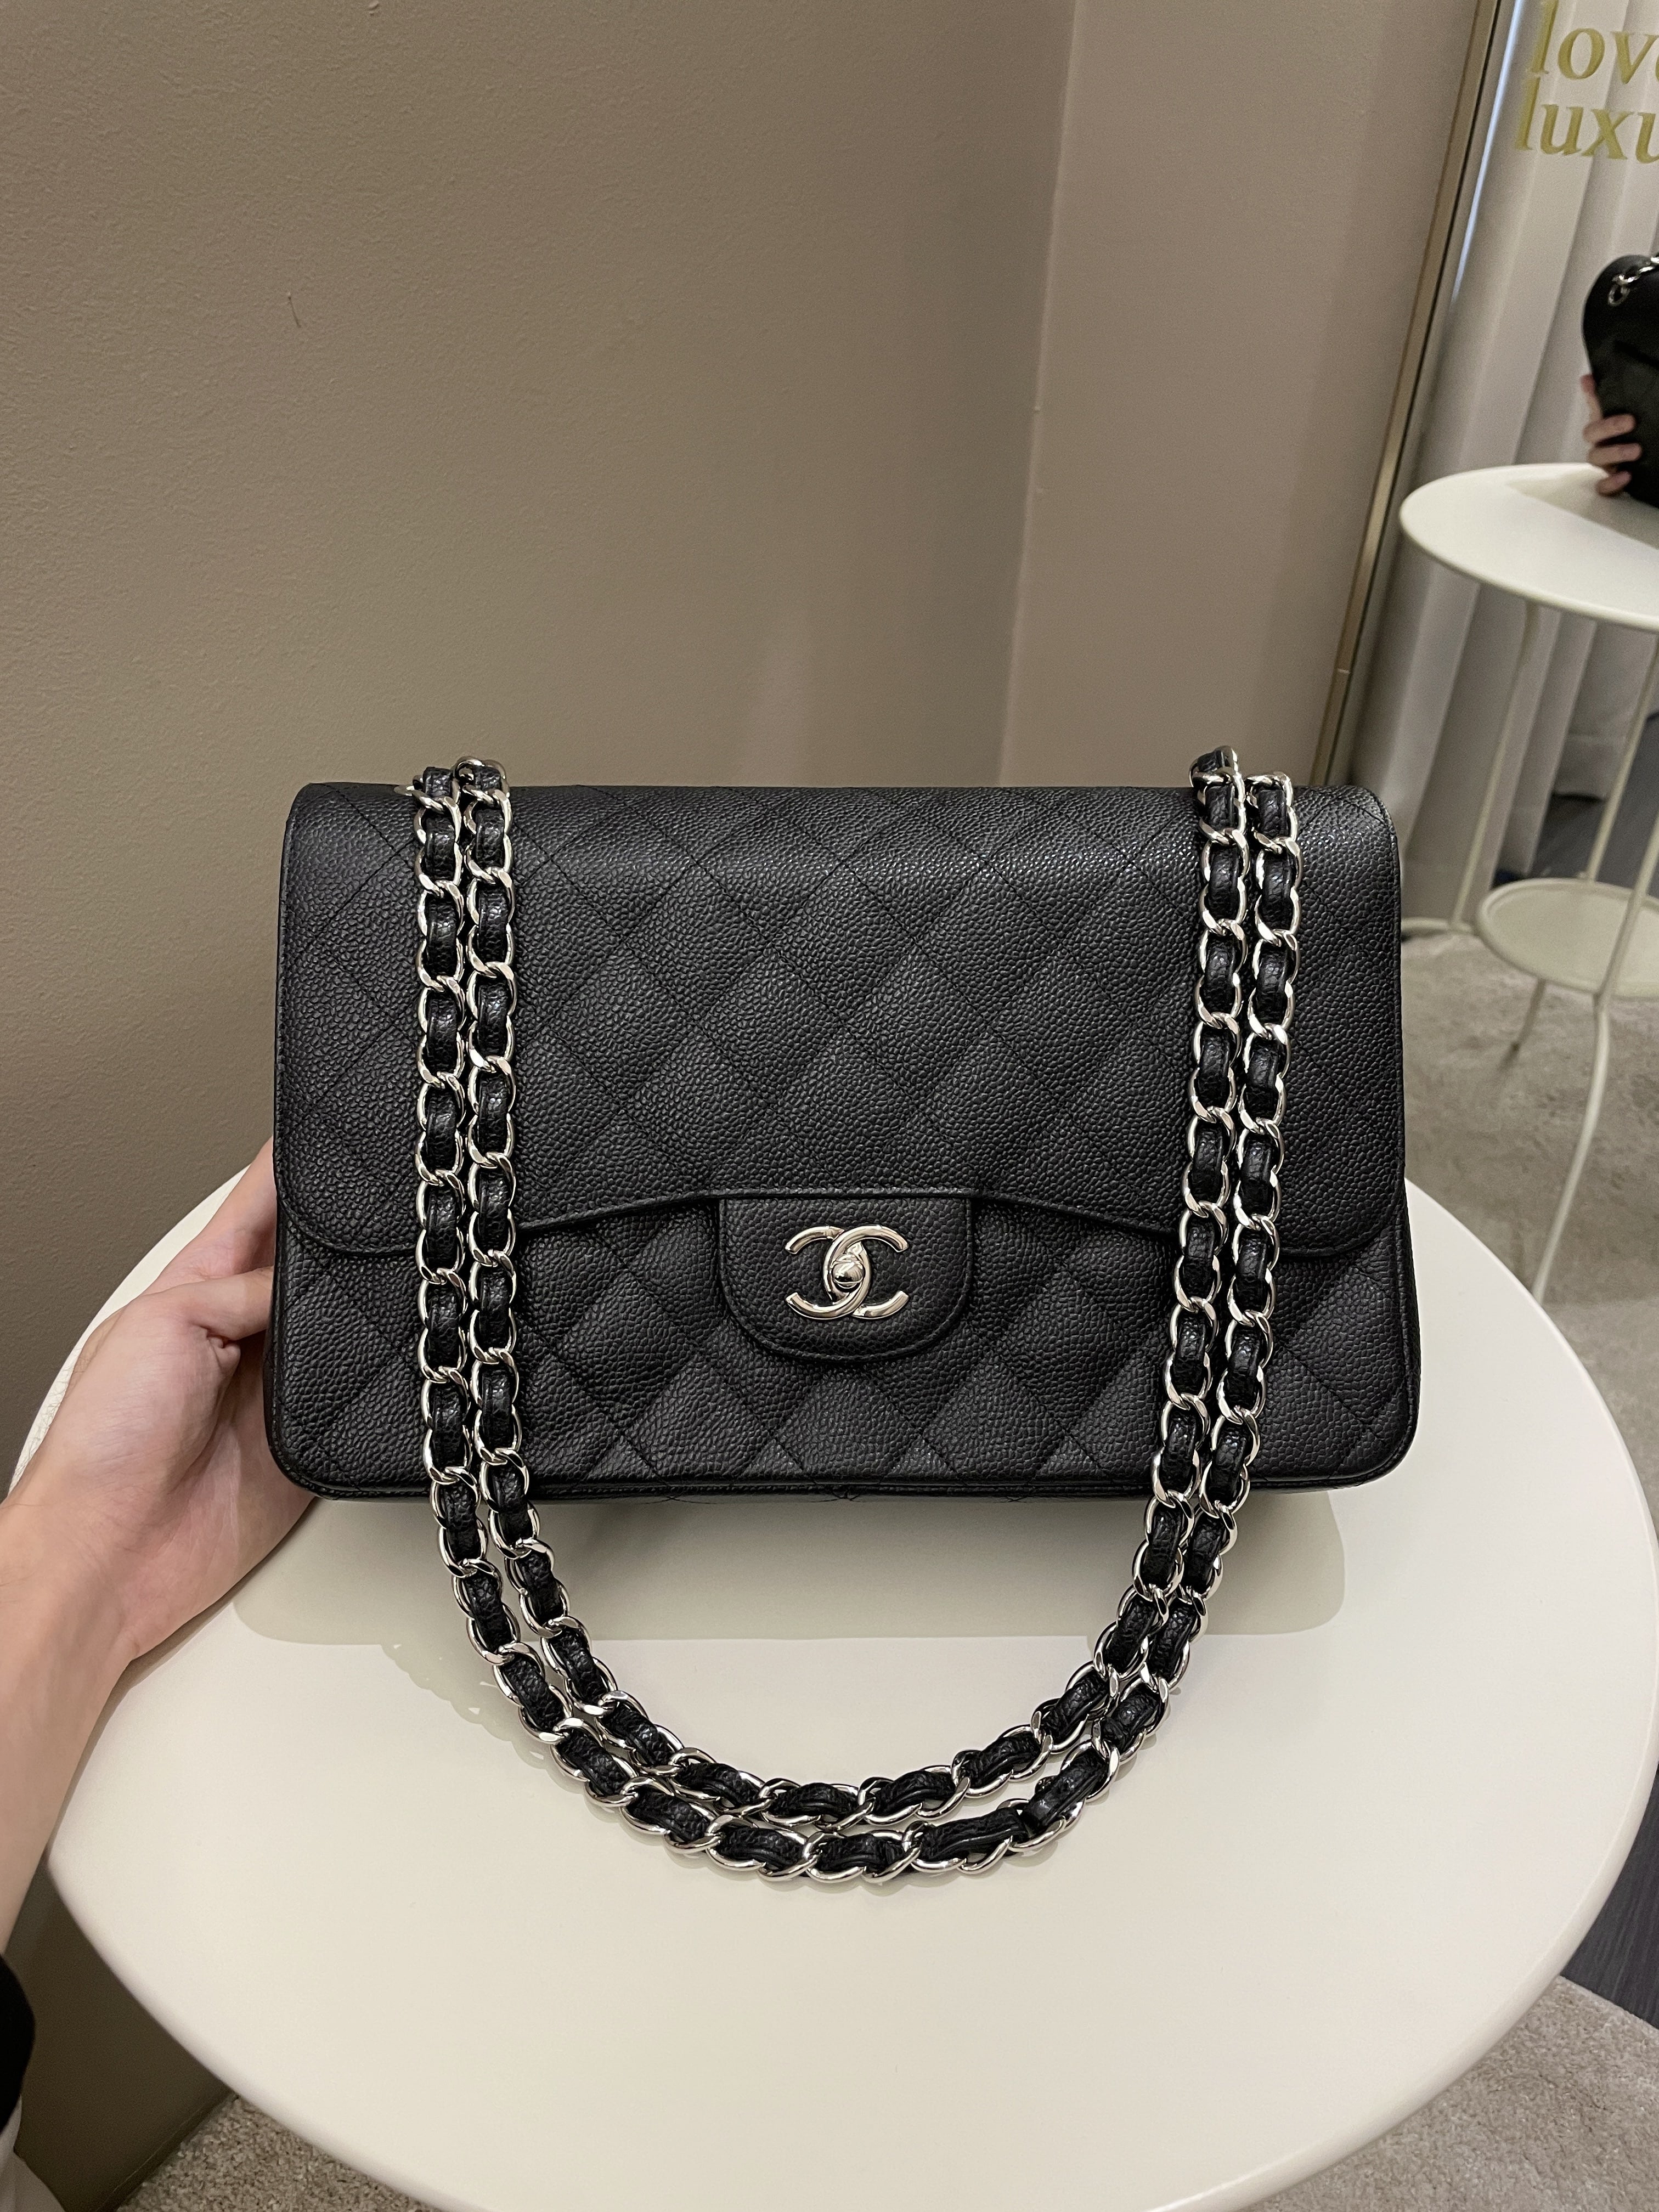 20% Non-refundable deposit to reserve: Chanel Classic Jumbo Double Flap  Black Quilted Caviar with gold hardware